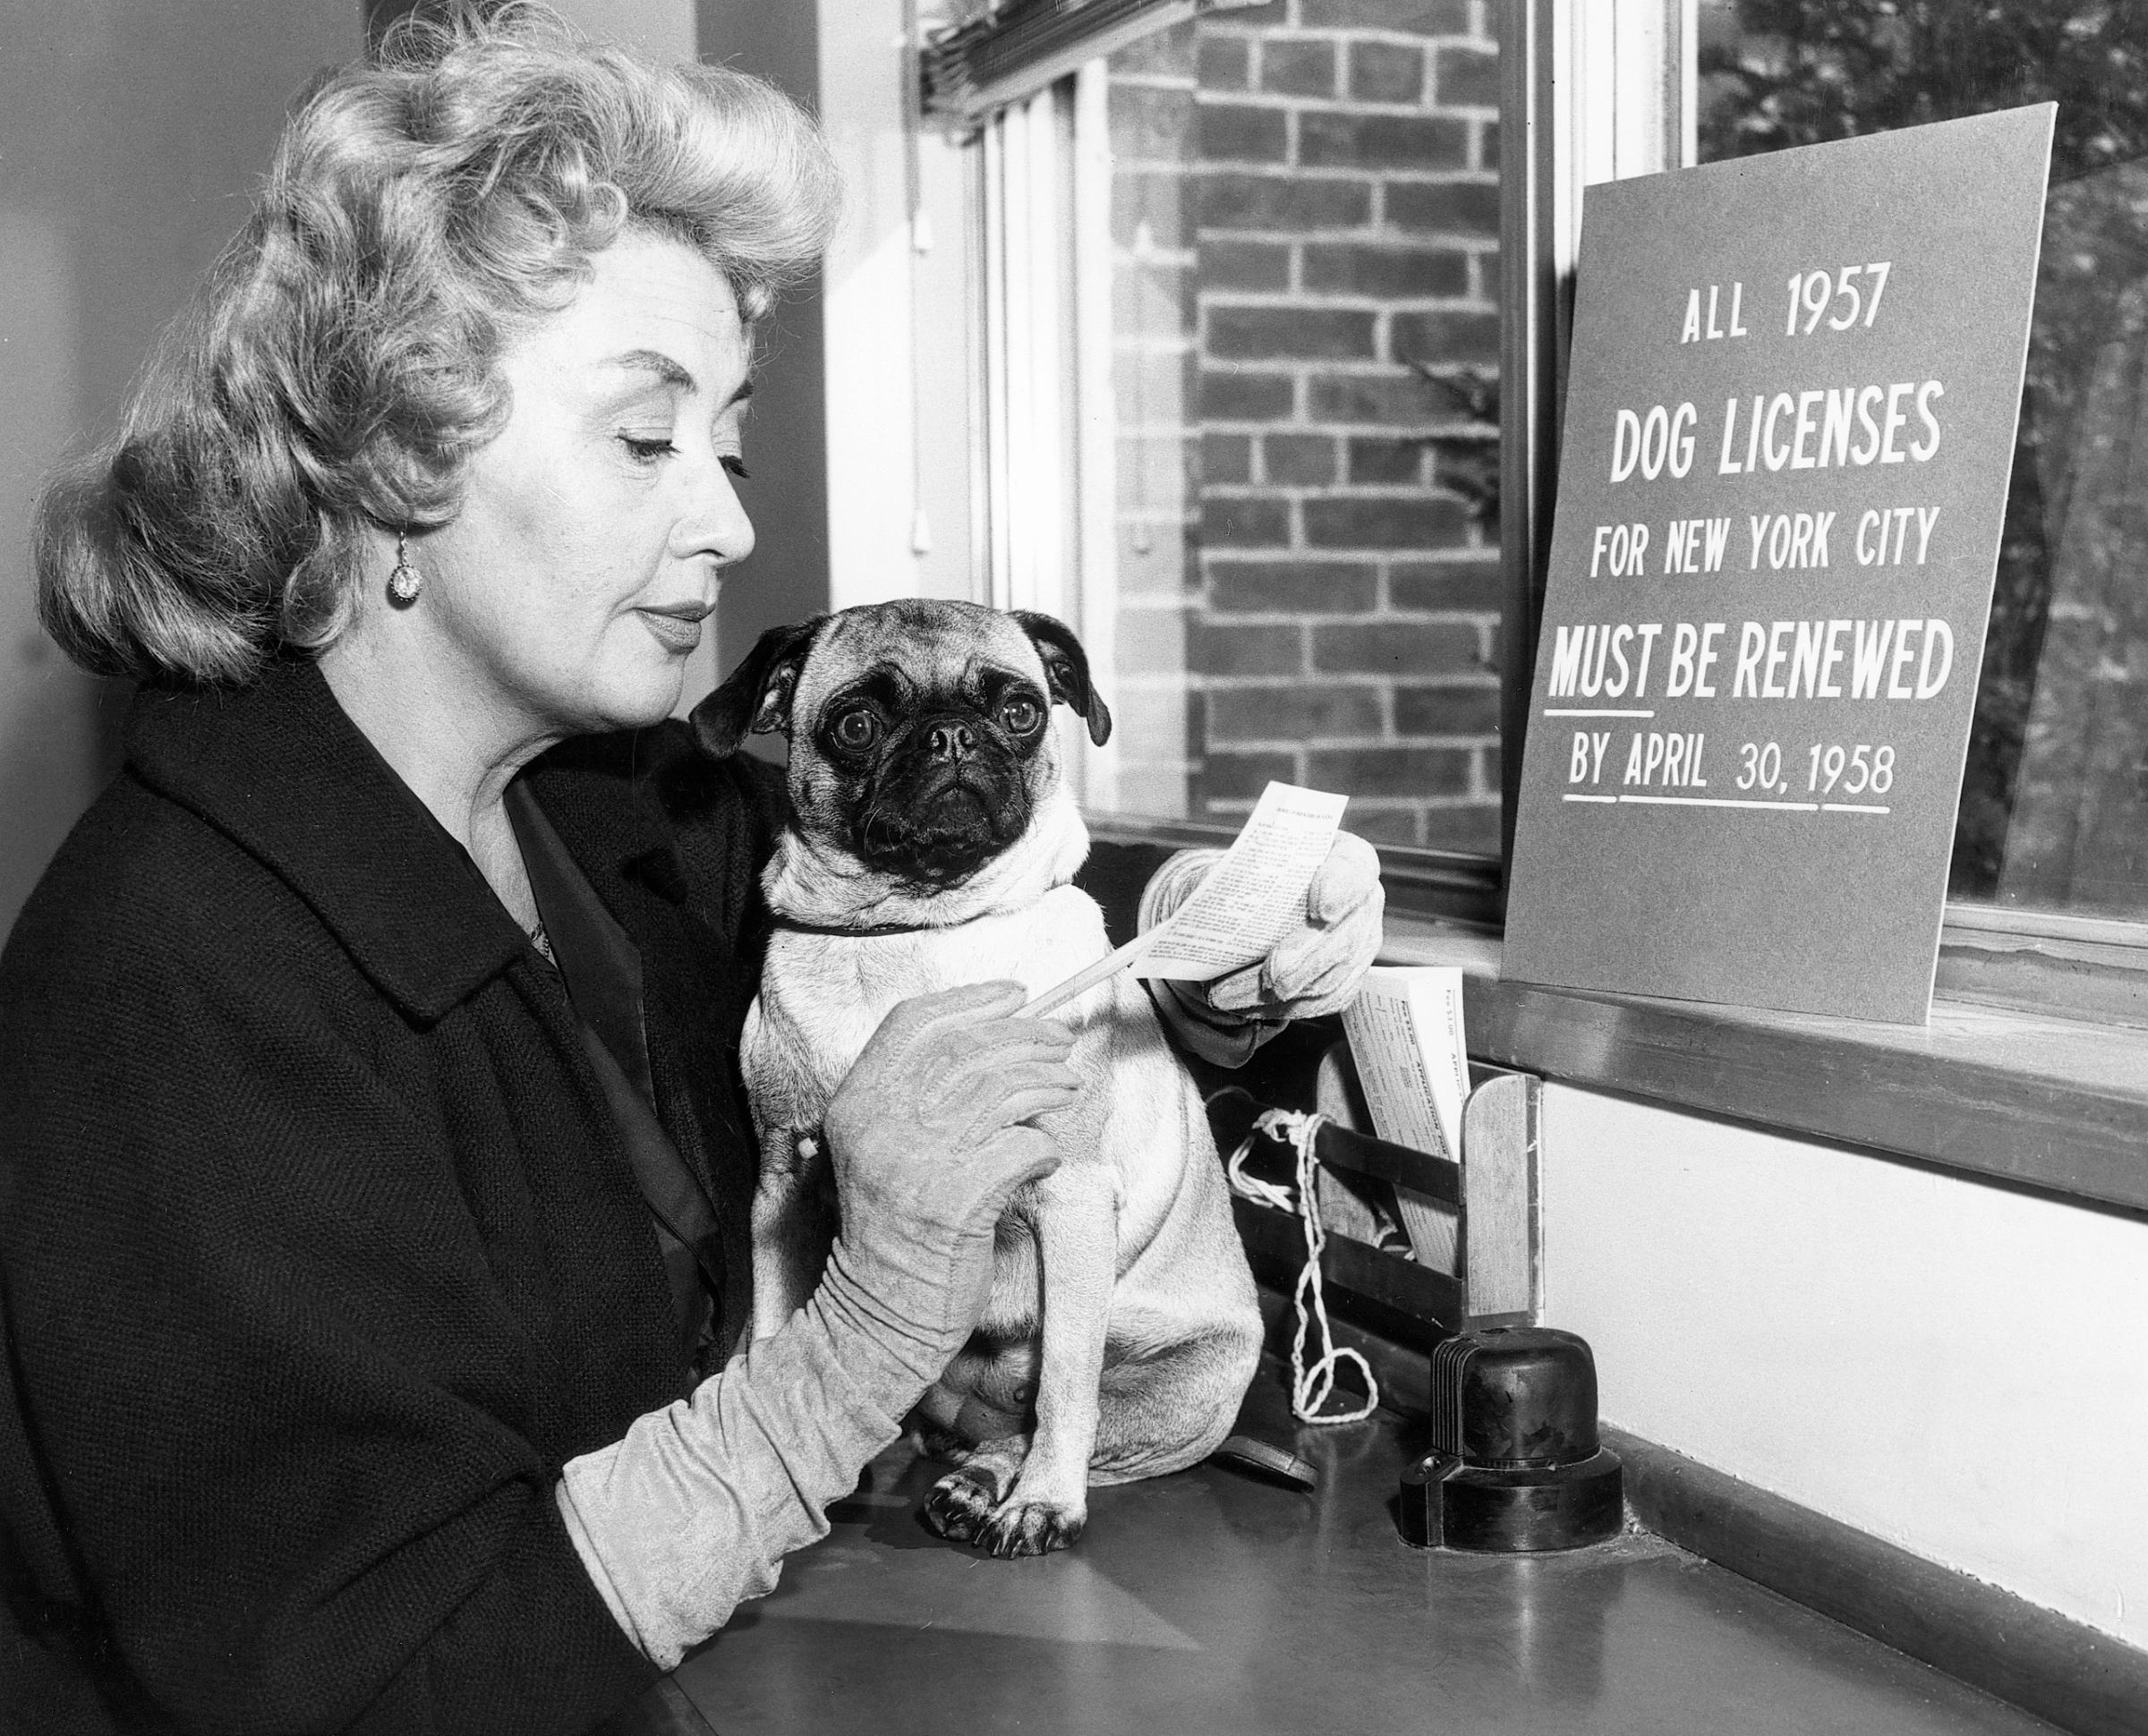 Actress Joan Blondell and her pug promote dog licensing for the ASPCA, 1958